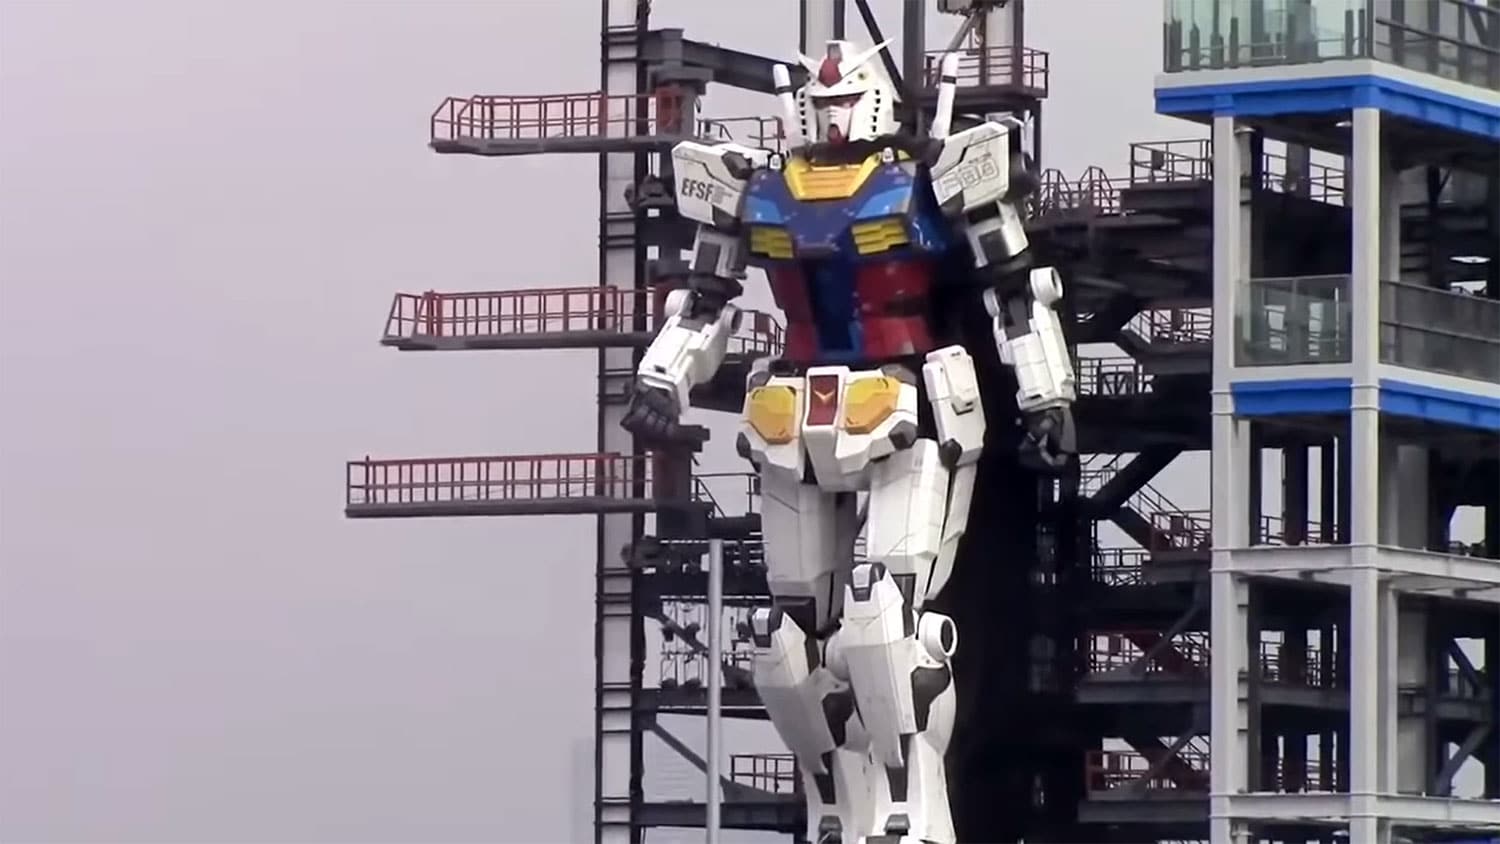 Japan's 60-foot-tall Gundam RX-78-2 robot takes 'its first steps'